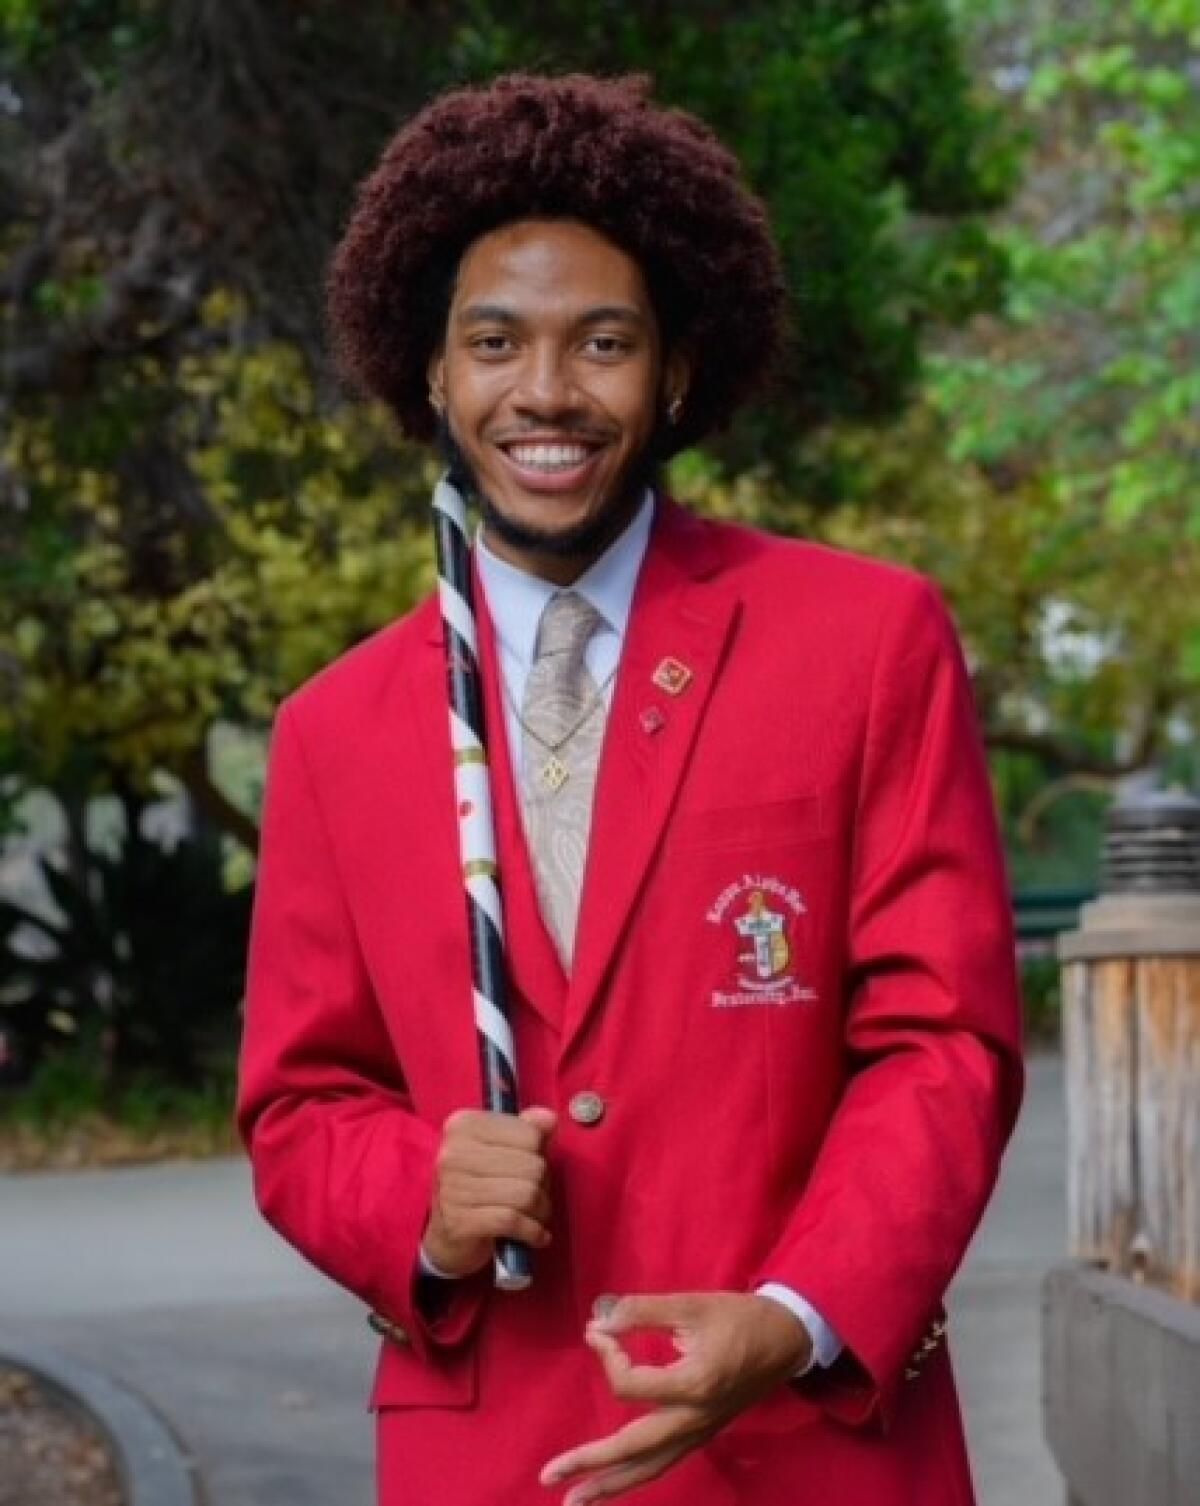 mere og mere Alvorlig køber Opinion: 'It's like being surrounded by iron in every direction' in Kappa  Alpha Psi - The San Diego Union-Tribune